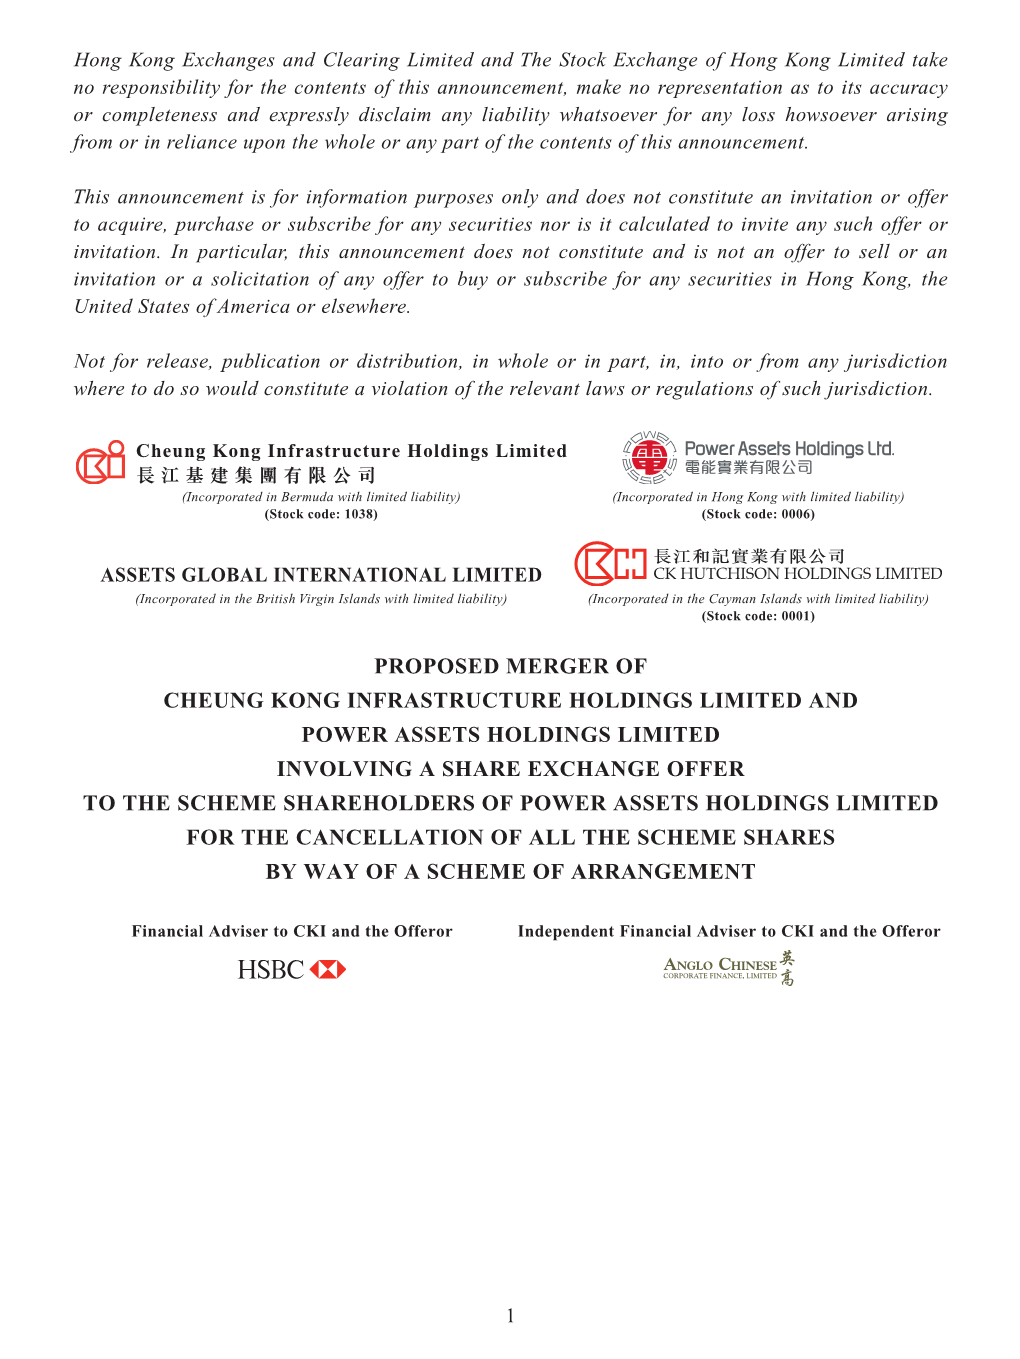 Proposed Merger of Cheung Kong Infrastructure Holdings Limited and Power Assets Holdings Limited Involving a Share Exchange Offe